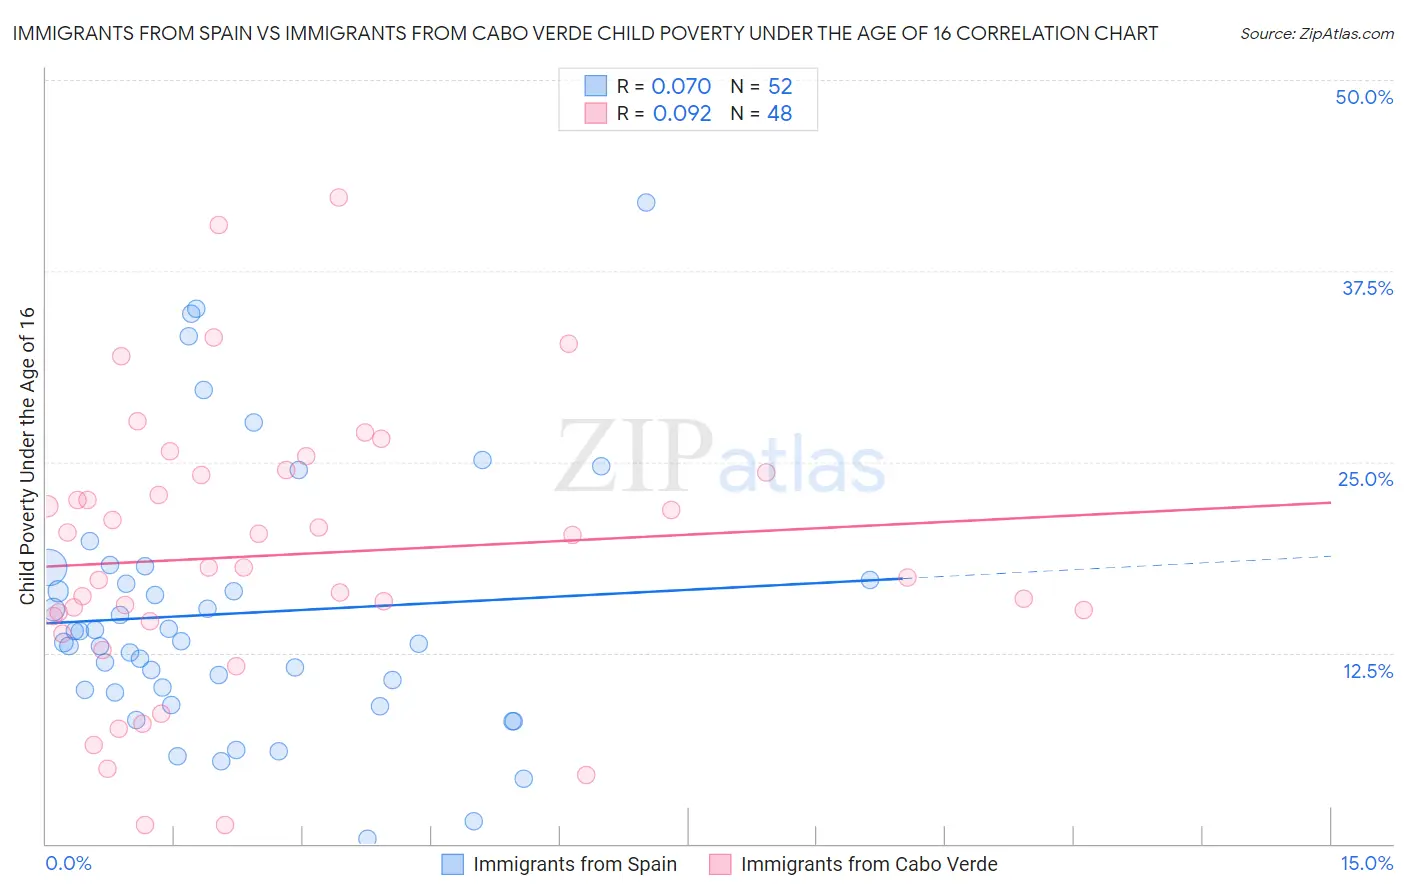 Immigrants from Spain vs Immigrants from Cabo Verde Child Poverty Under the Age of 16